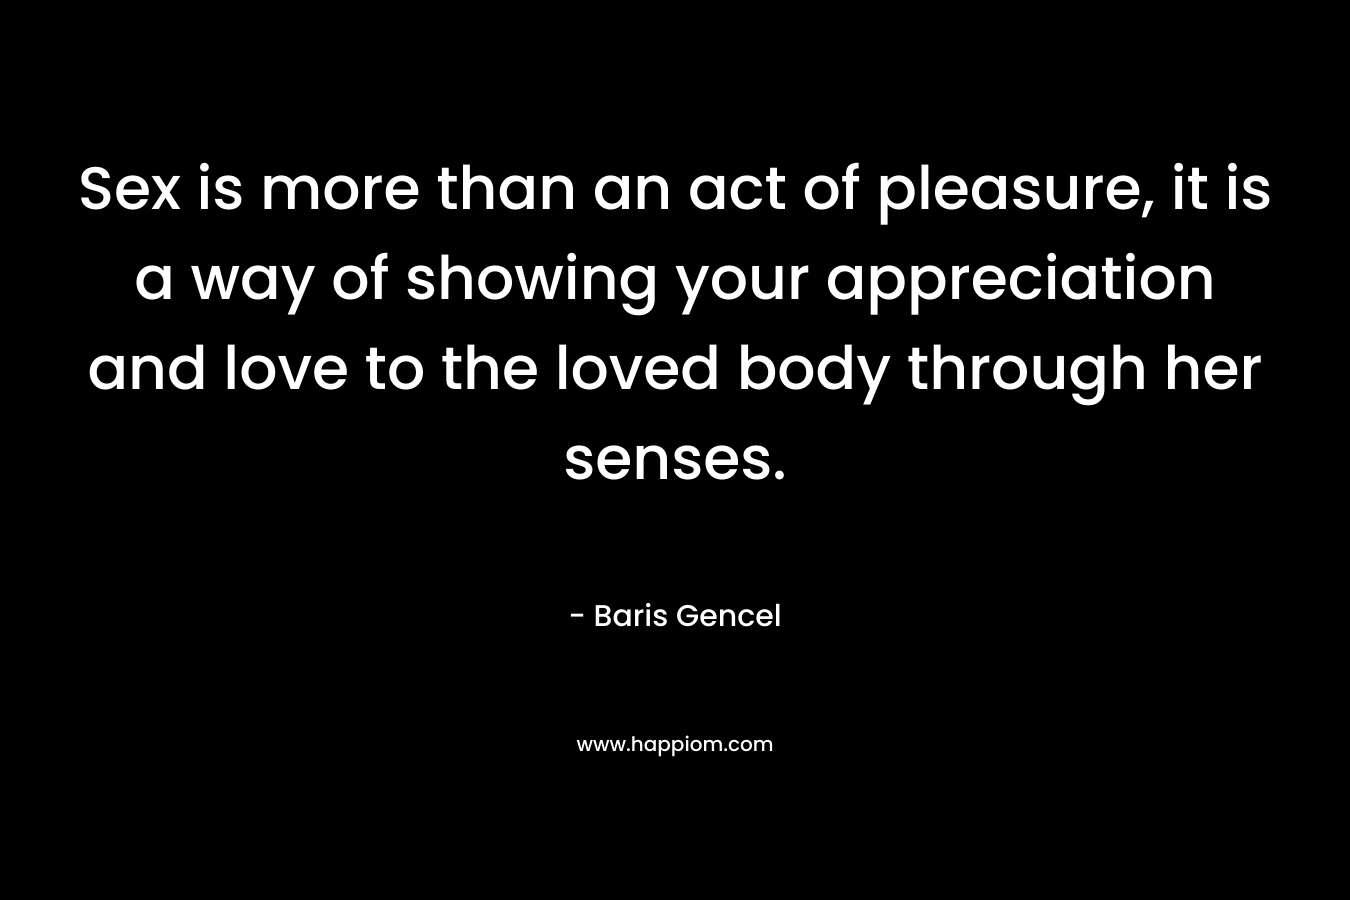 Sex is more than an act of pleasure, it is a way of showing your appreciation and love to the loved body through her senses. – Baris Gencel